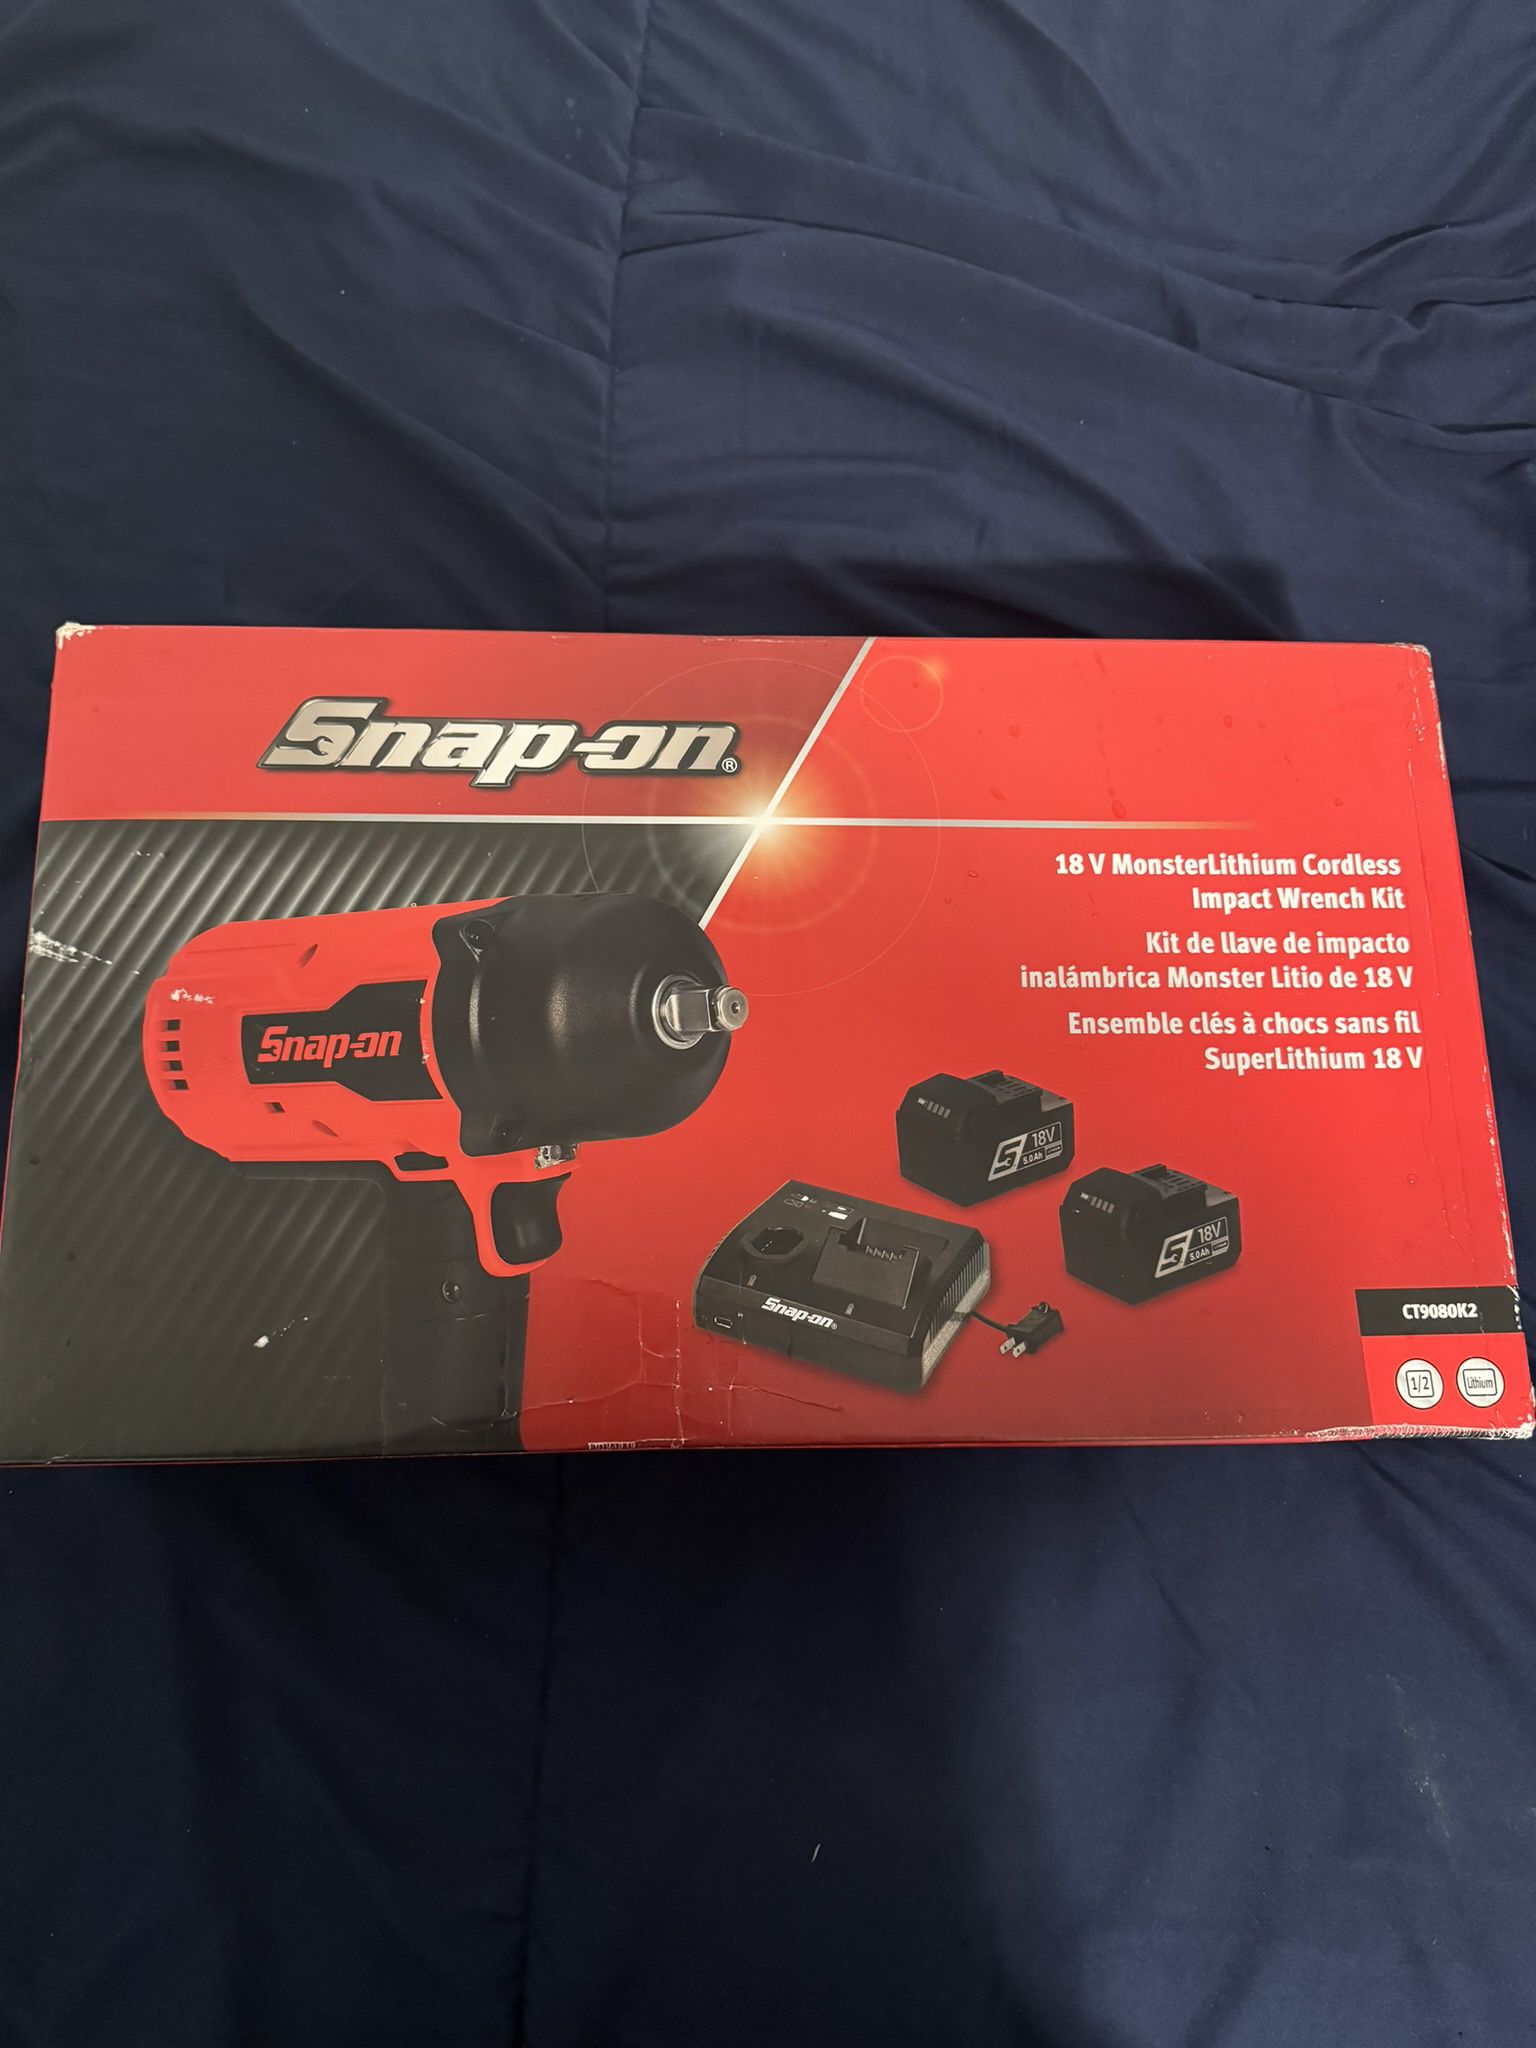 SNAP ON 18 V 1/2" Drive MonsterLithium Cordless Impact Wrench Kit (Red)